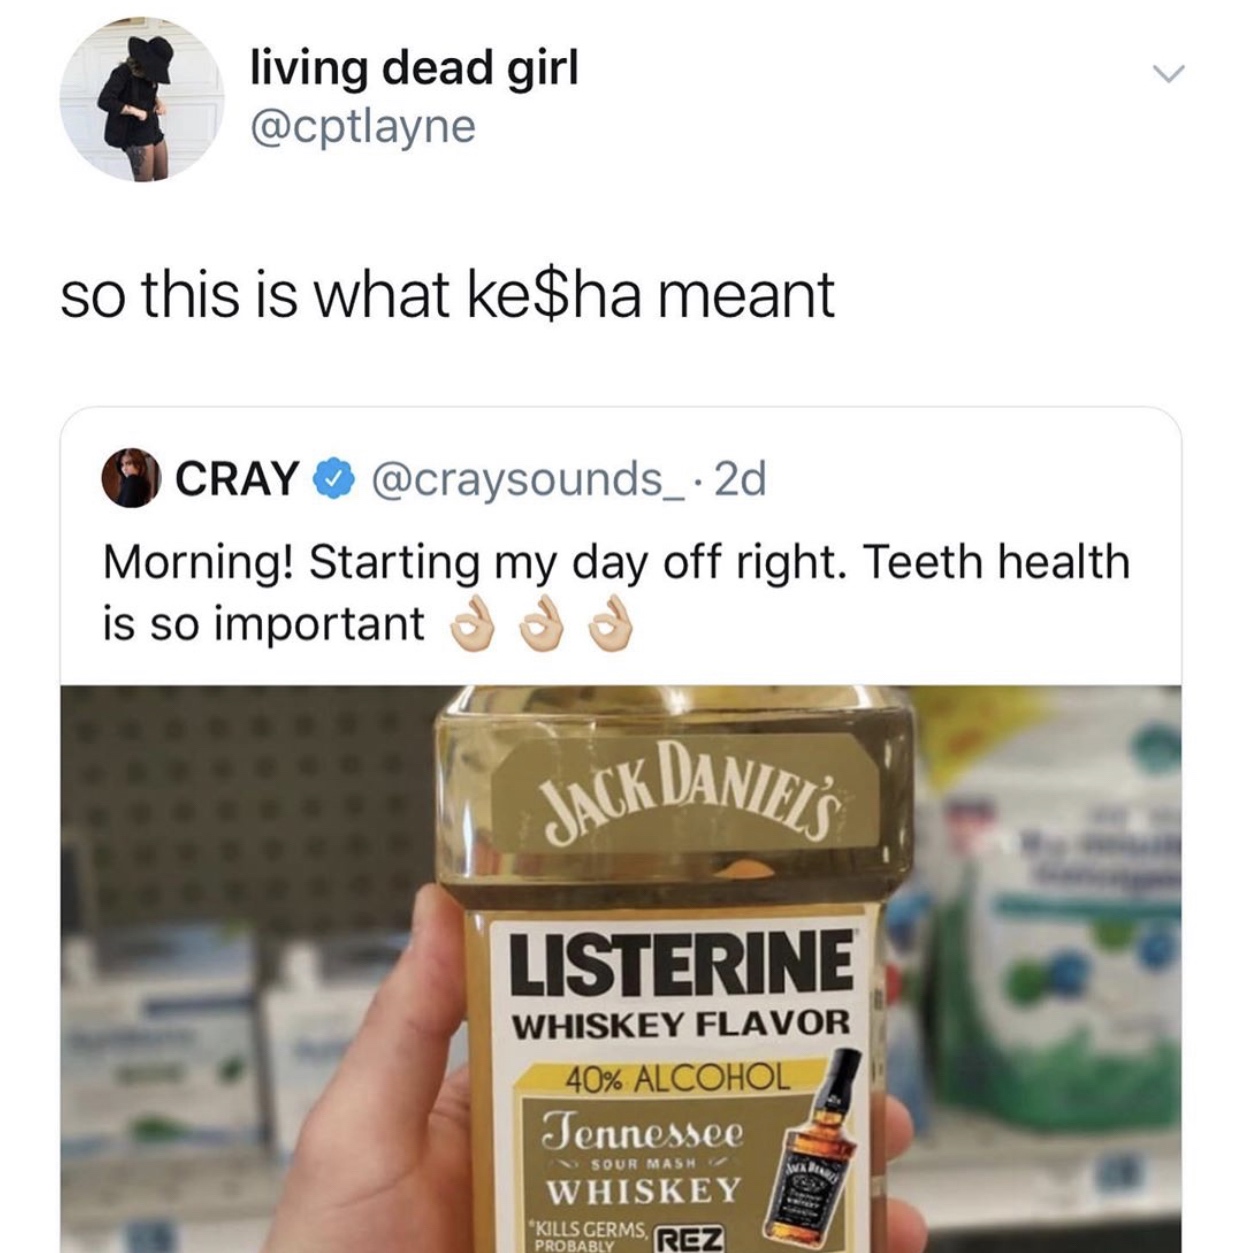 jack daniels listerine - living dead girl so this is what ke$ha meant Cray 2d Morning! Starting my day off right. Teeth health is so important de Jack Daniel Listerine Whiskey Flavor 40% Alcohol Tennessee Whiskey "Kusagerms, Rez Sour Mash